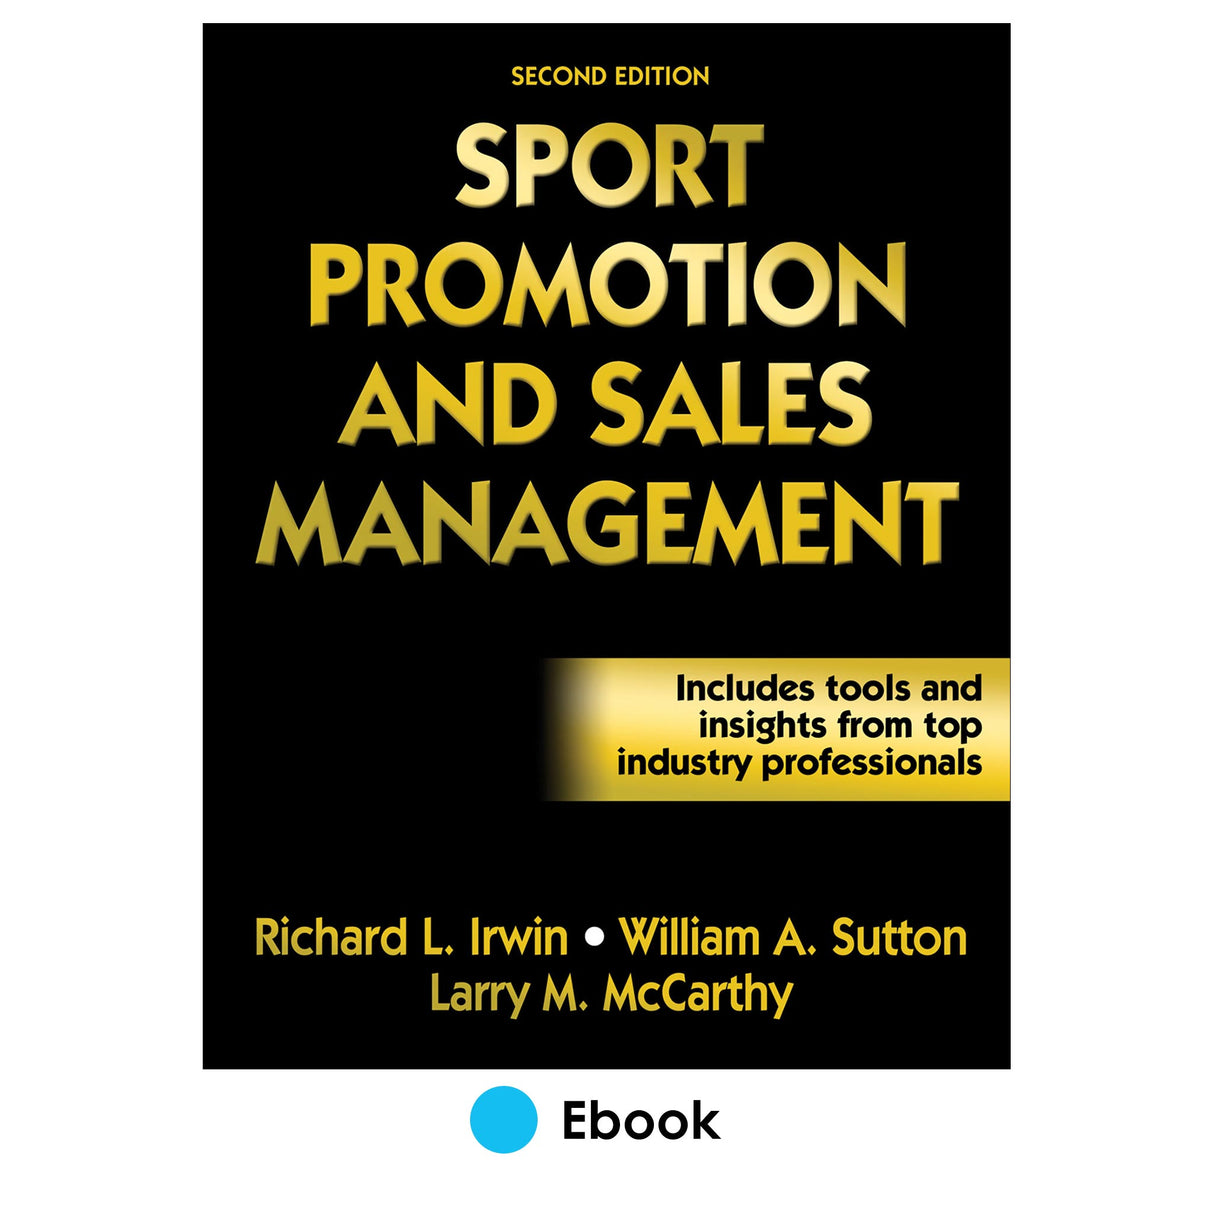 Sport Promotion and Sales Management 2nd Edition PDF